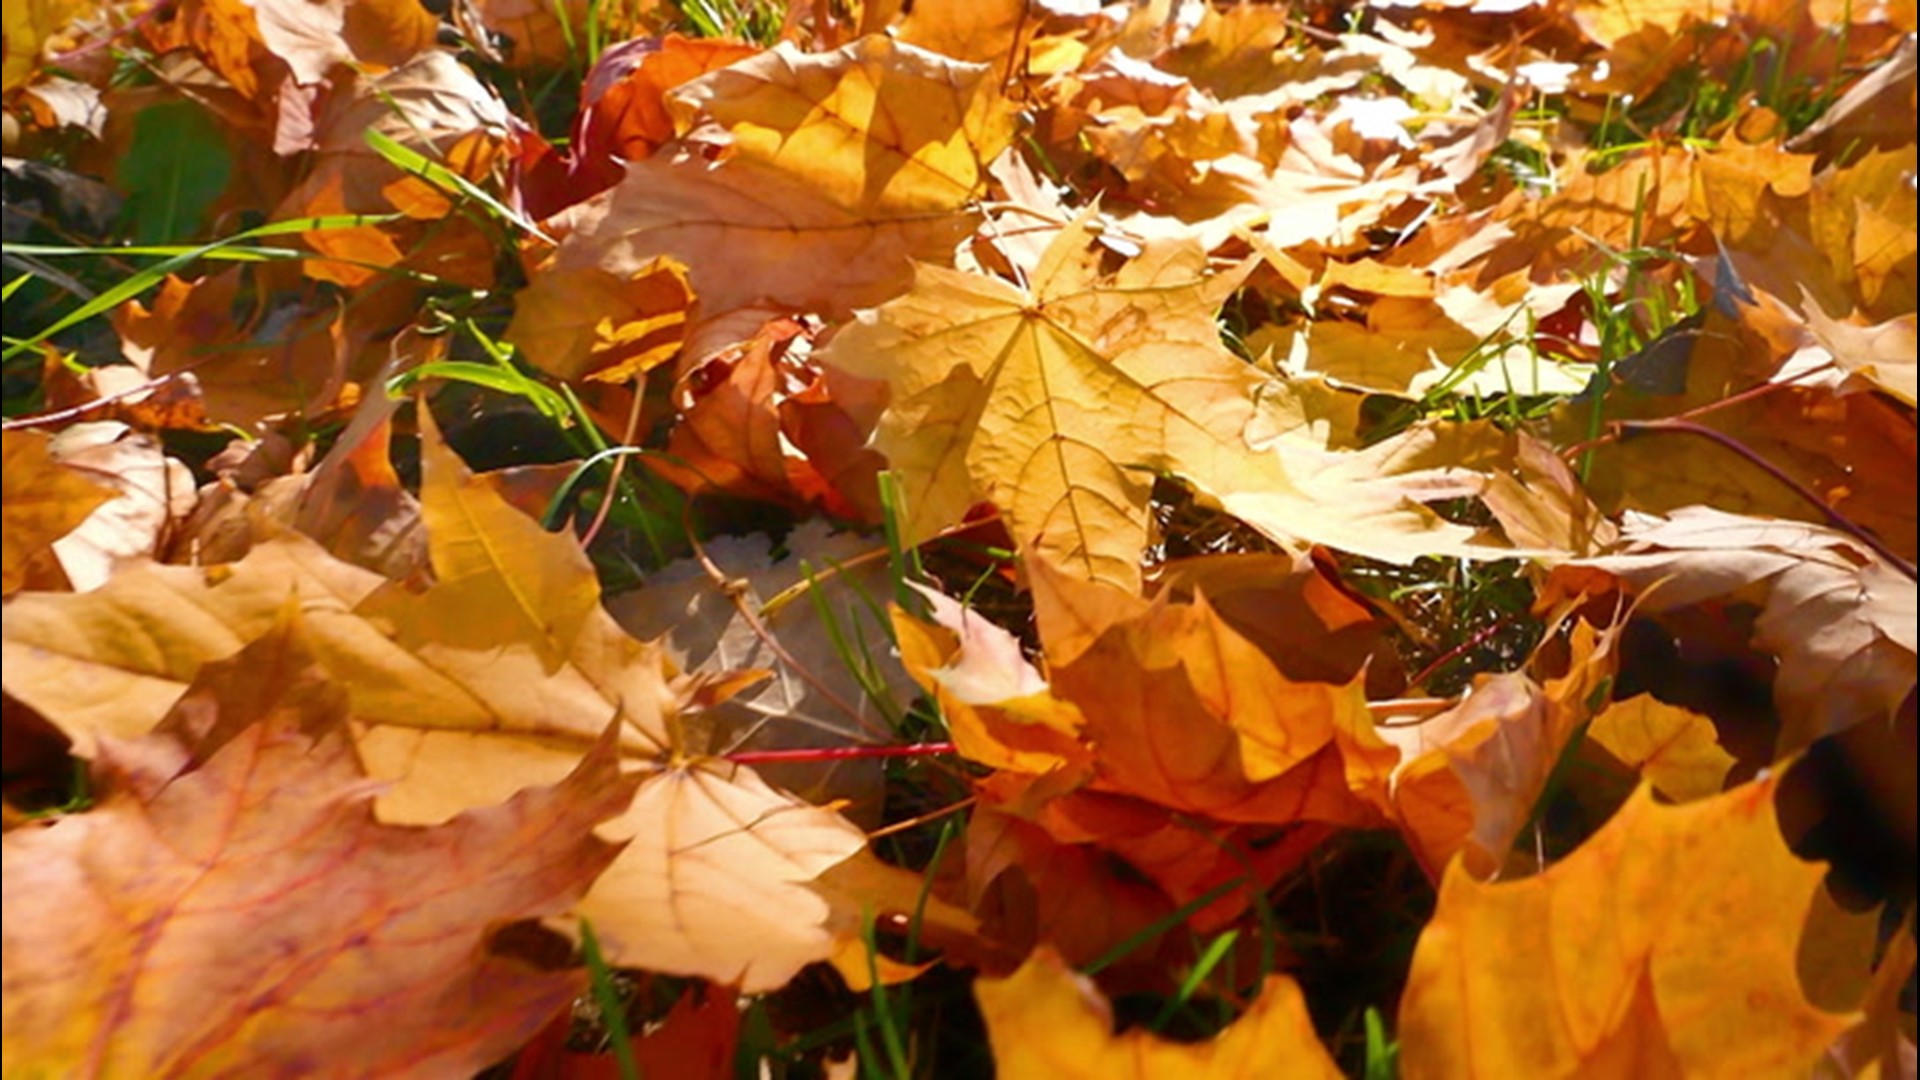 Why leaves change colors during the fall